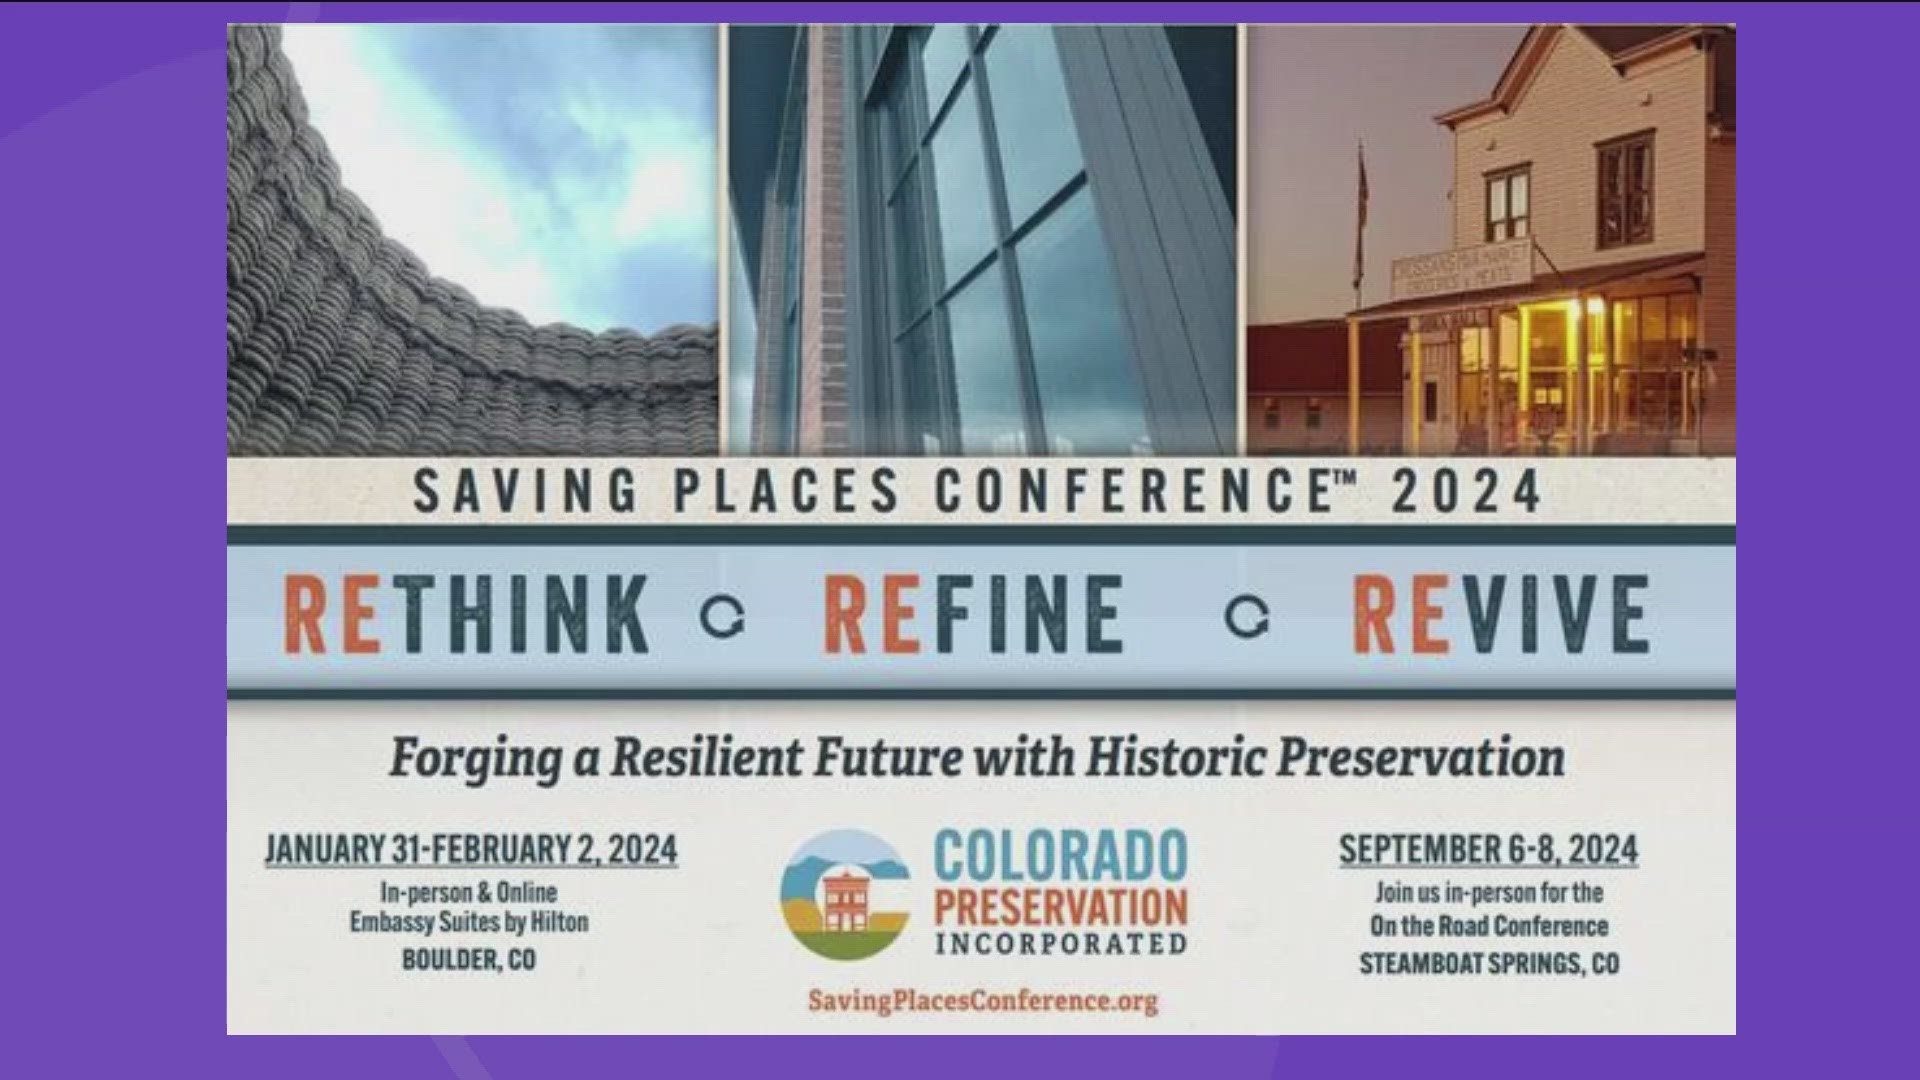 The Saving Places Conference happens on January 31st through February 2nd. Learn more and get tickets at ColoradoPreservation.org.